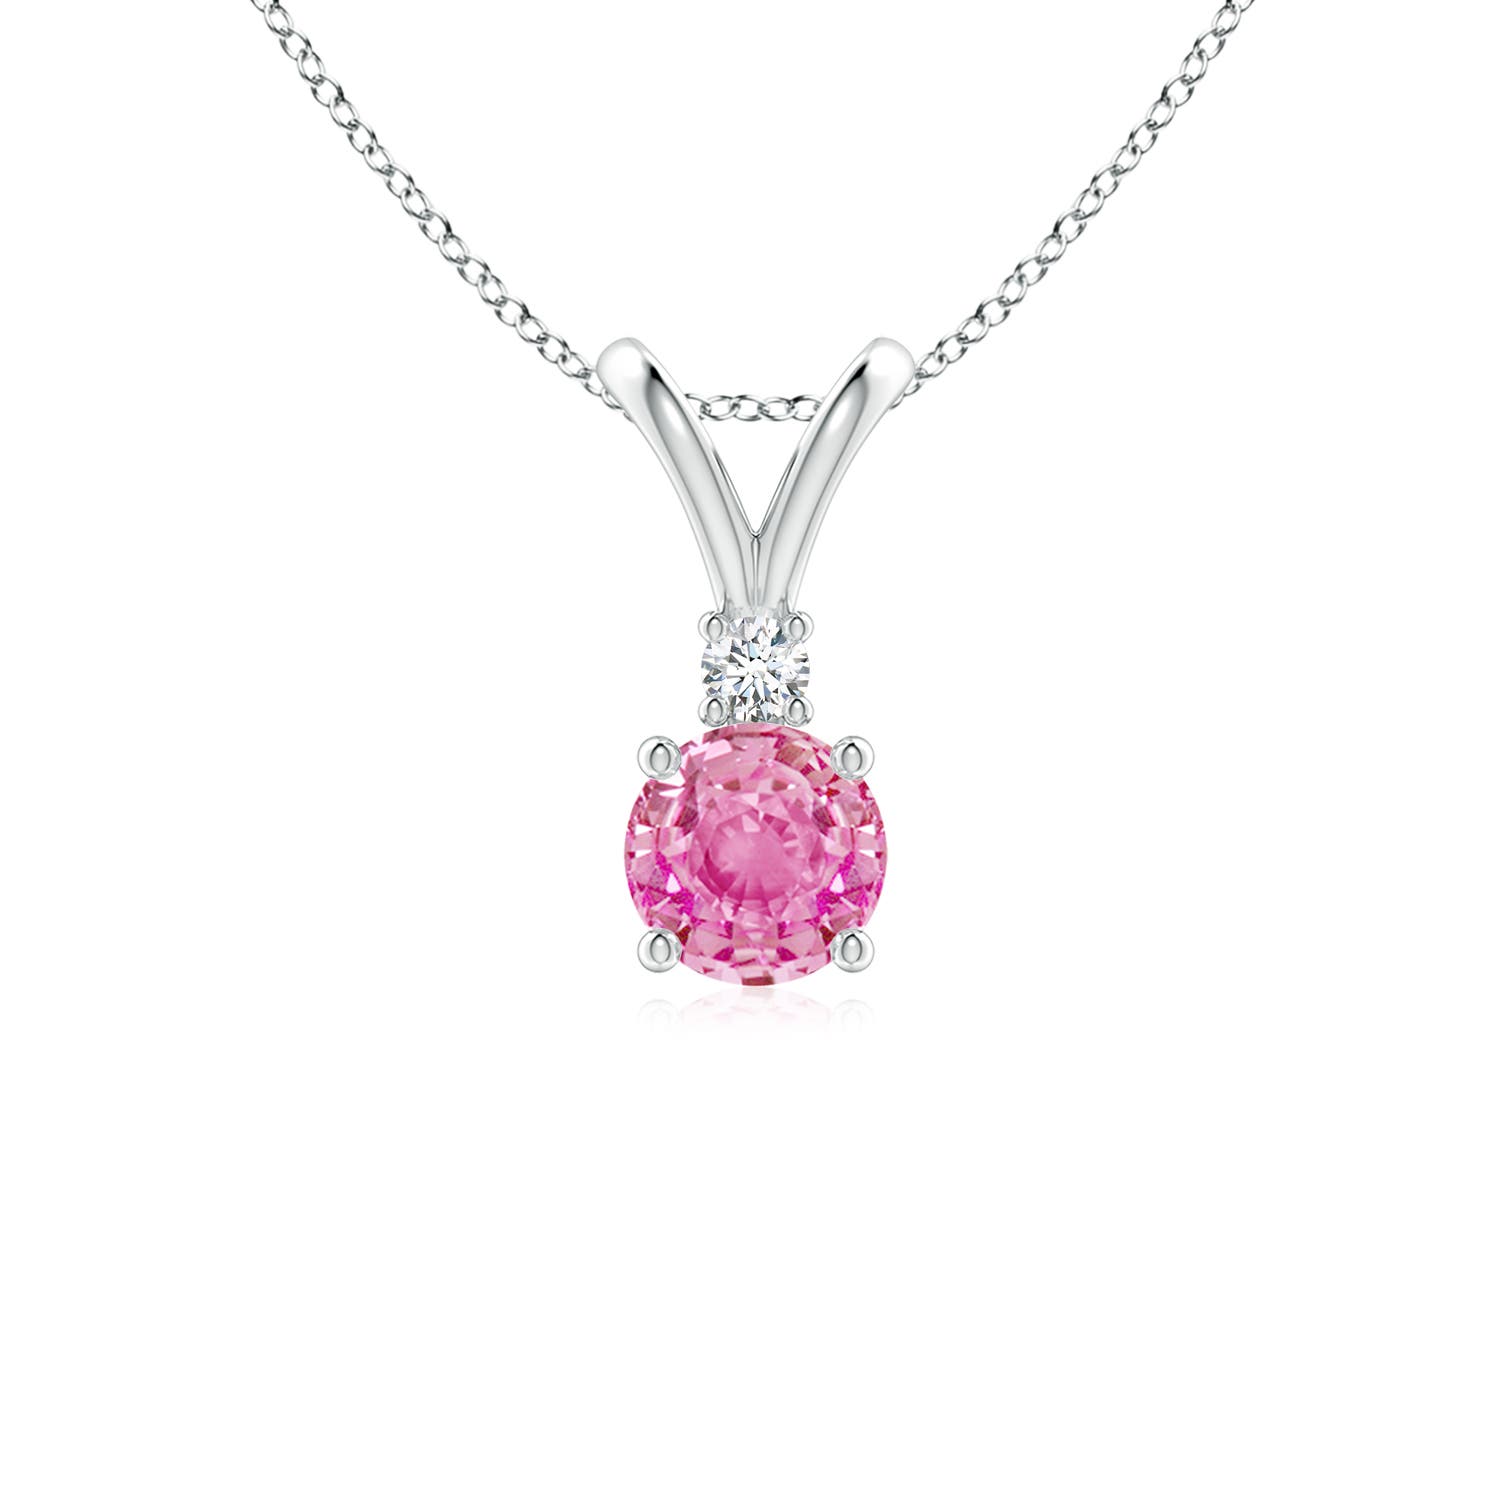 AA - Pink Sapphire / 0.63 CT / 14 KT White Gold